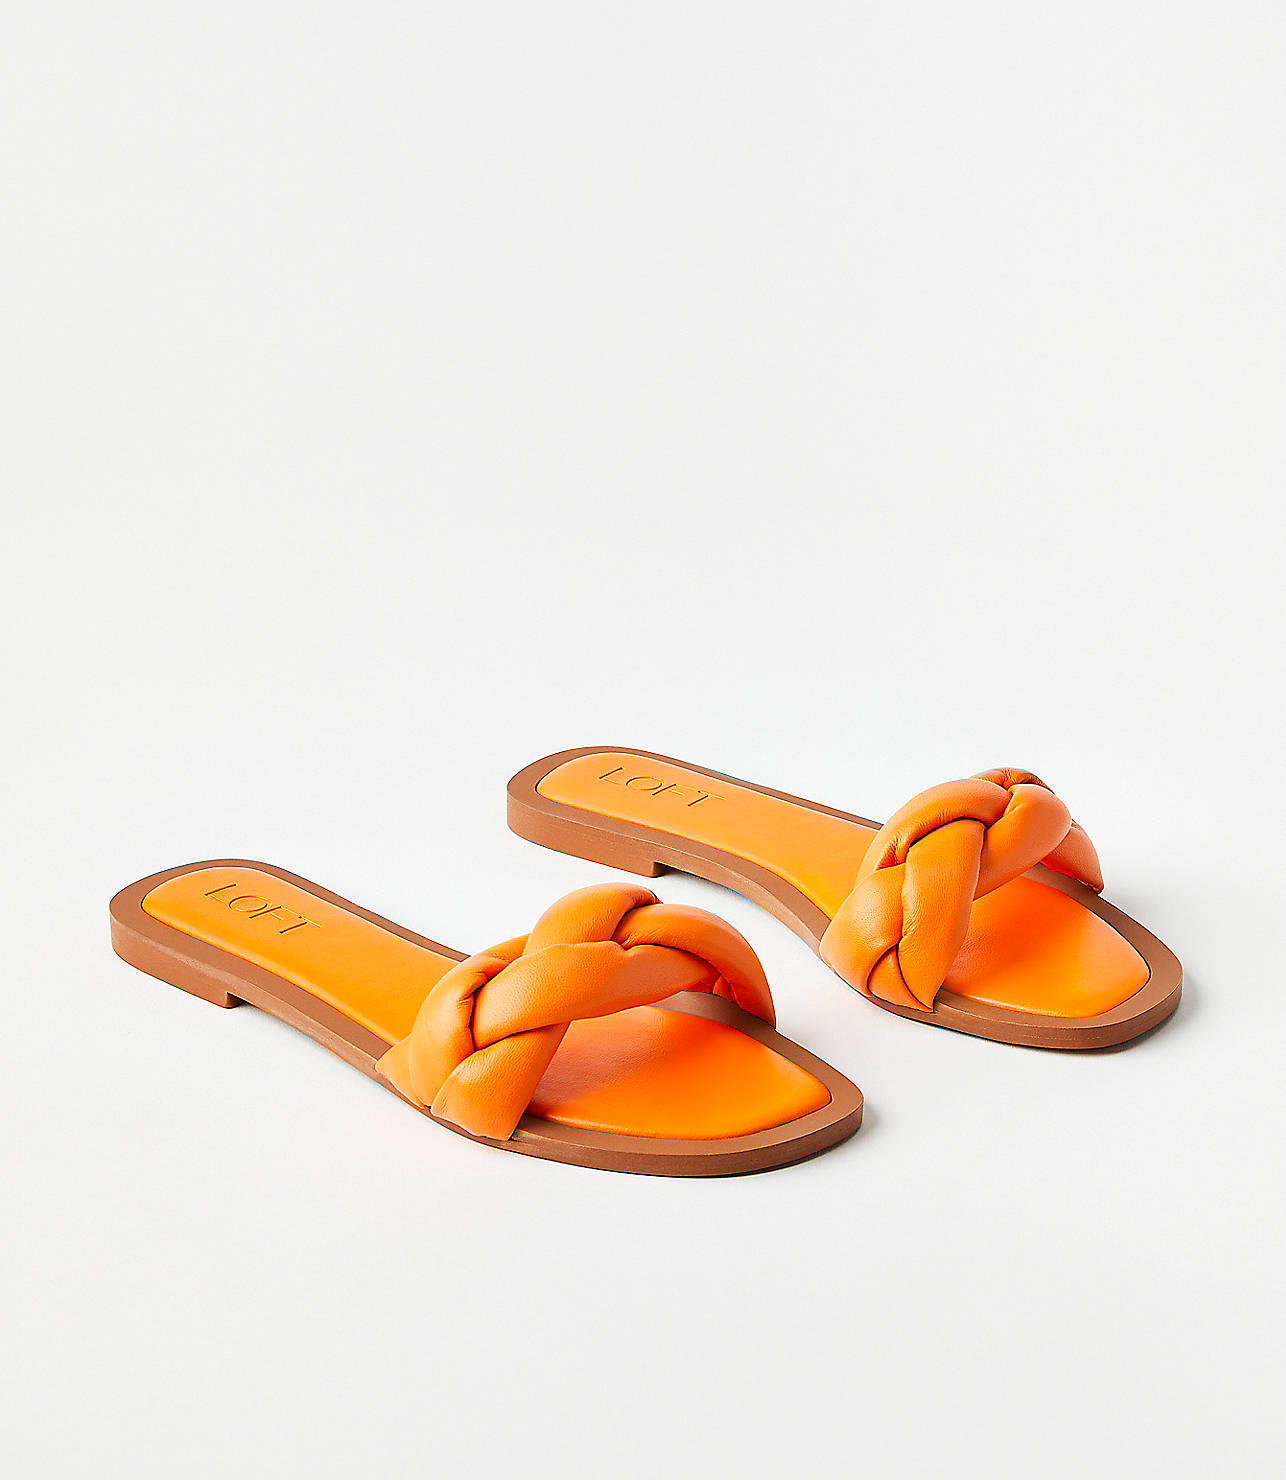 Padded Braided Leather Slide Sandals